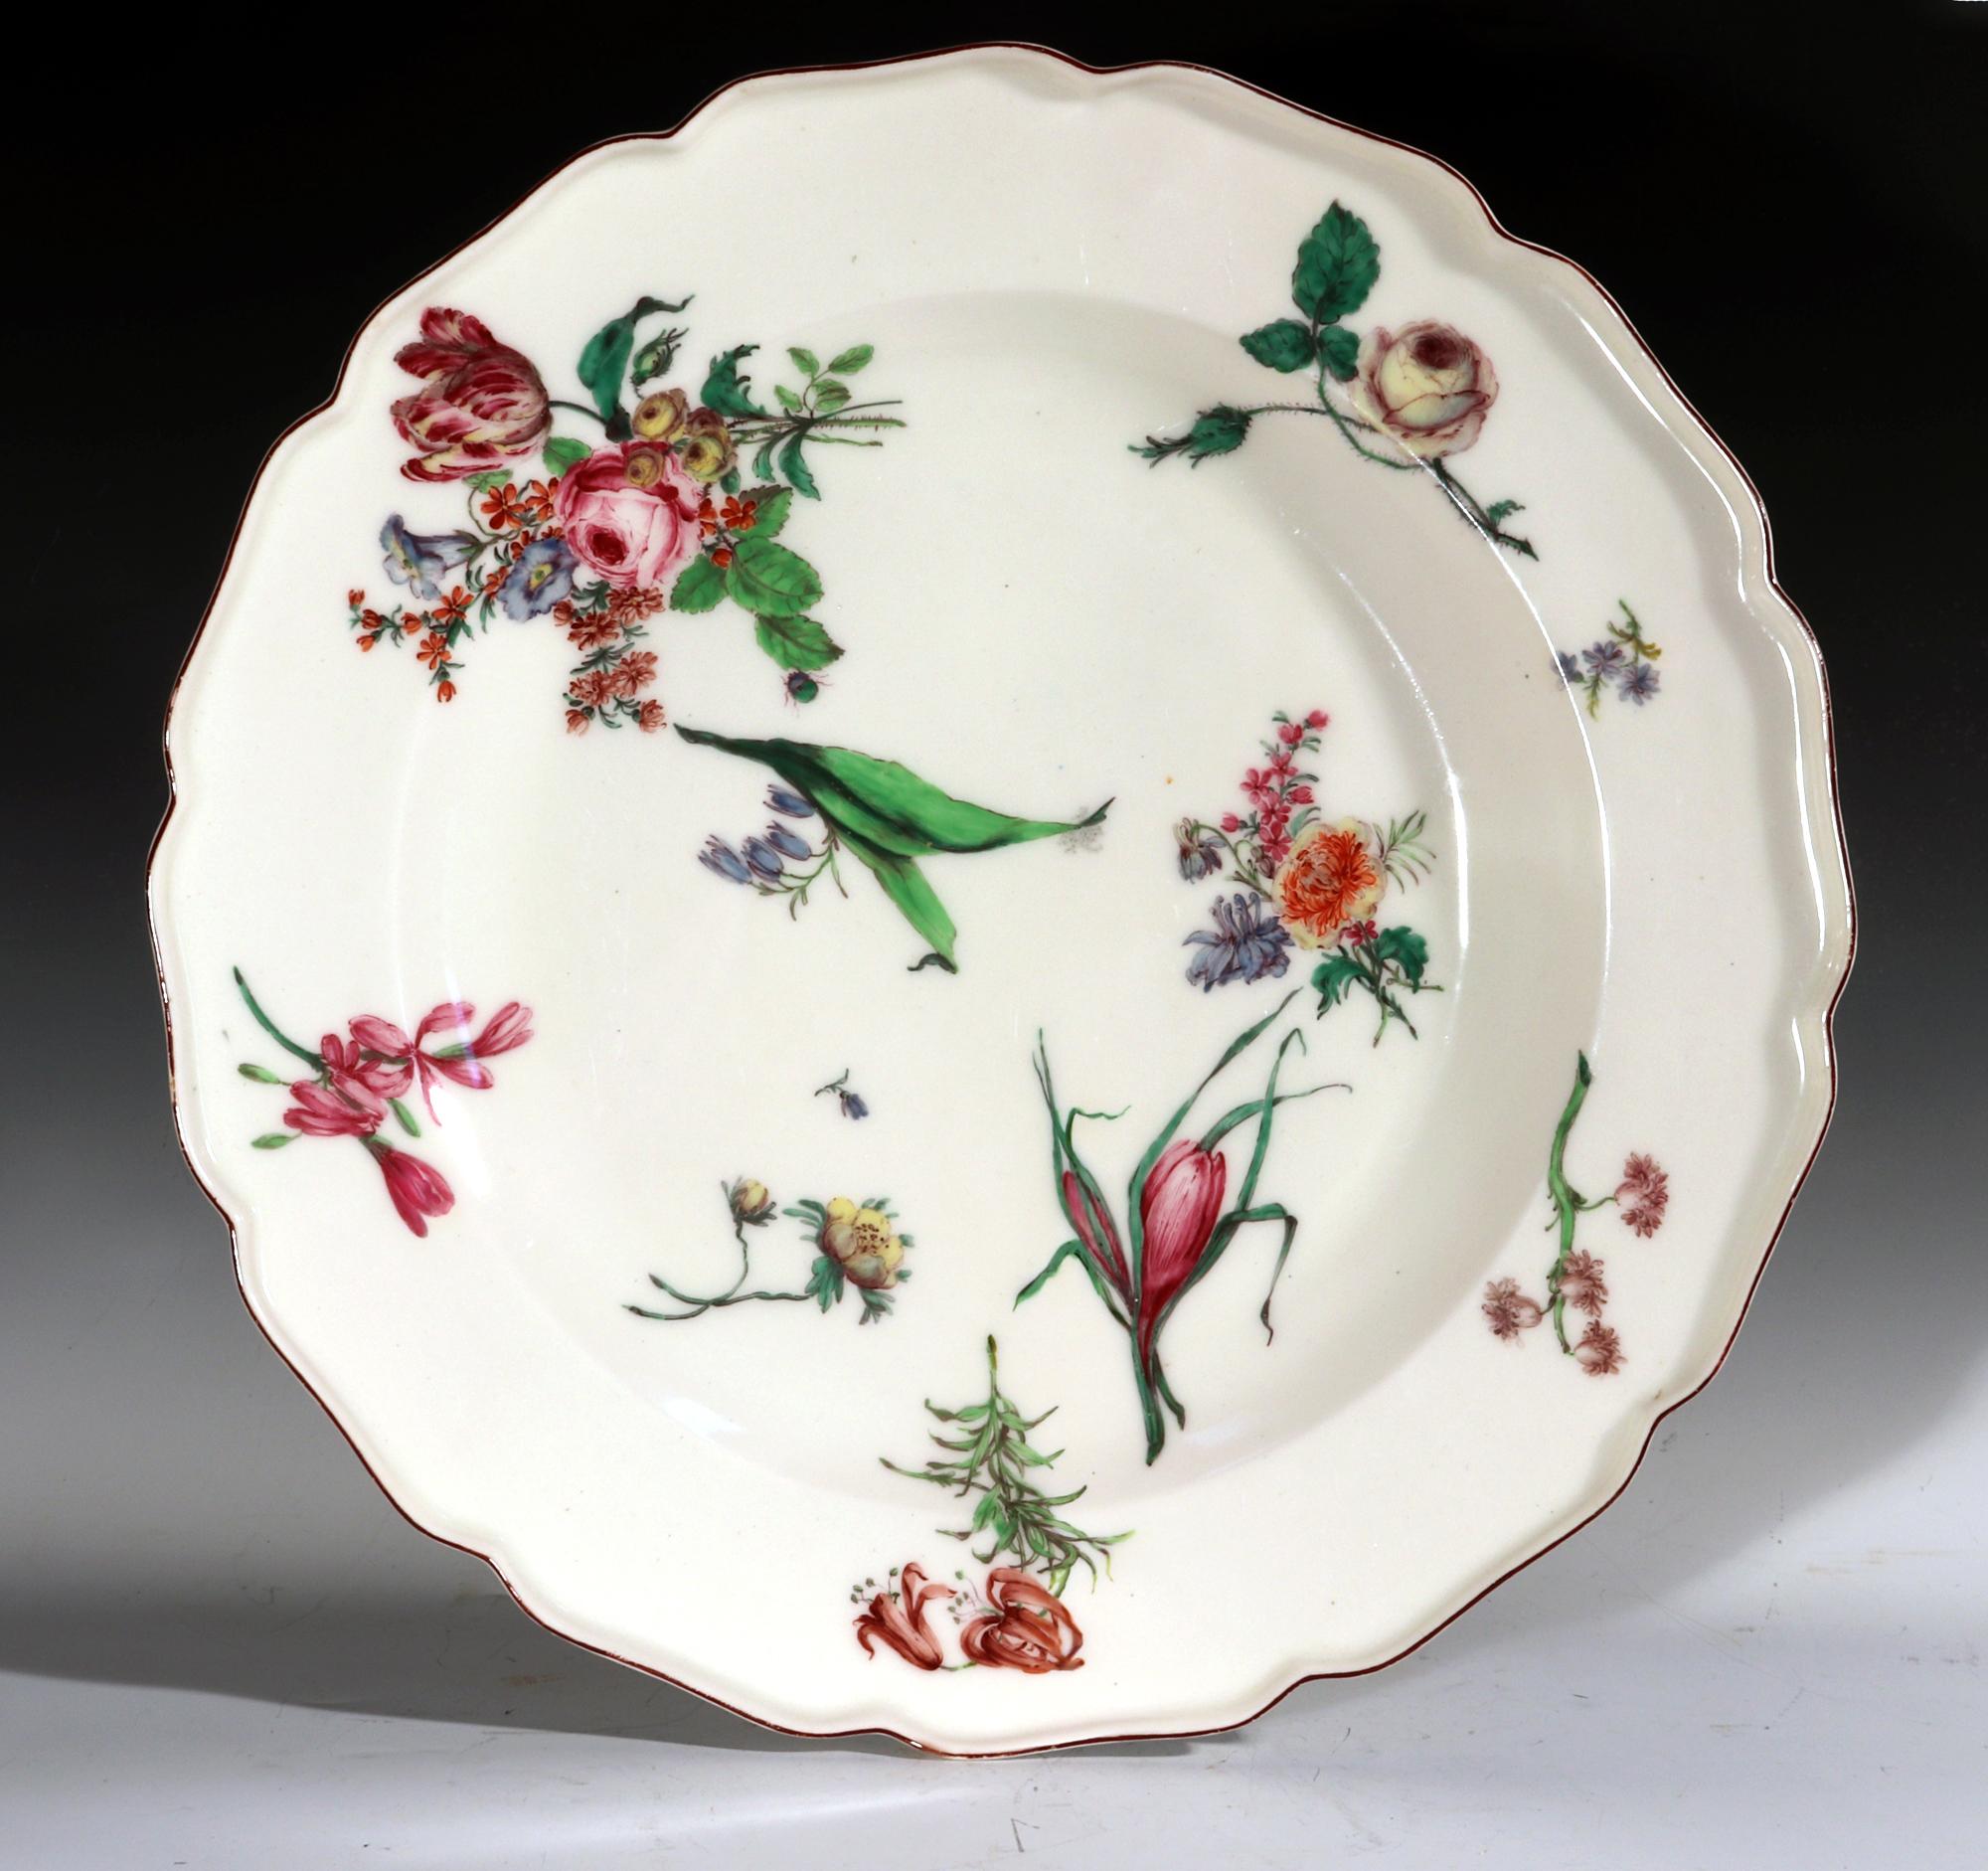 18th-century Chelsea Porcelain Large Botanical Dish,
Red Anchor Period,
Circa 1755.

The unusually large Chelsea porcelain dish, with a petal-shaped rim is decorated with scattered bouquets and flowers including roses and tulips. The painting is